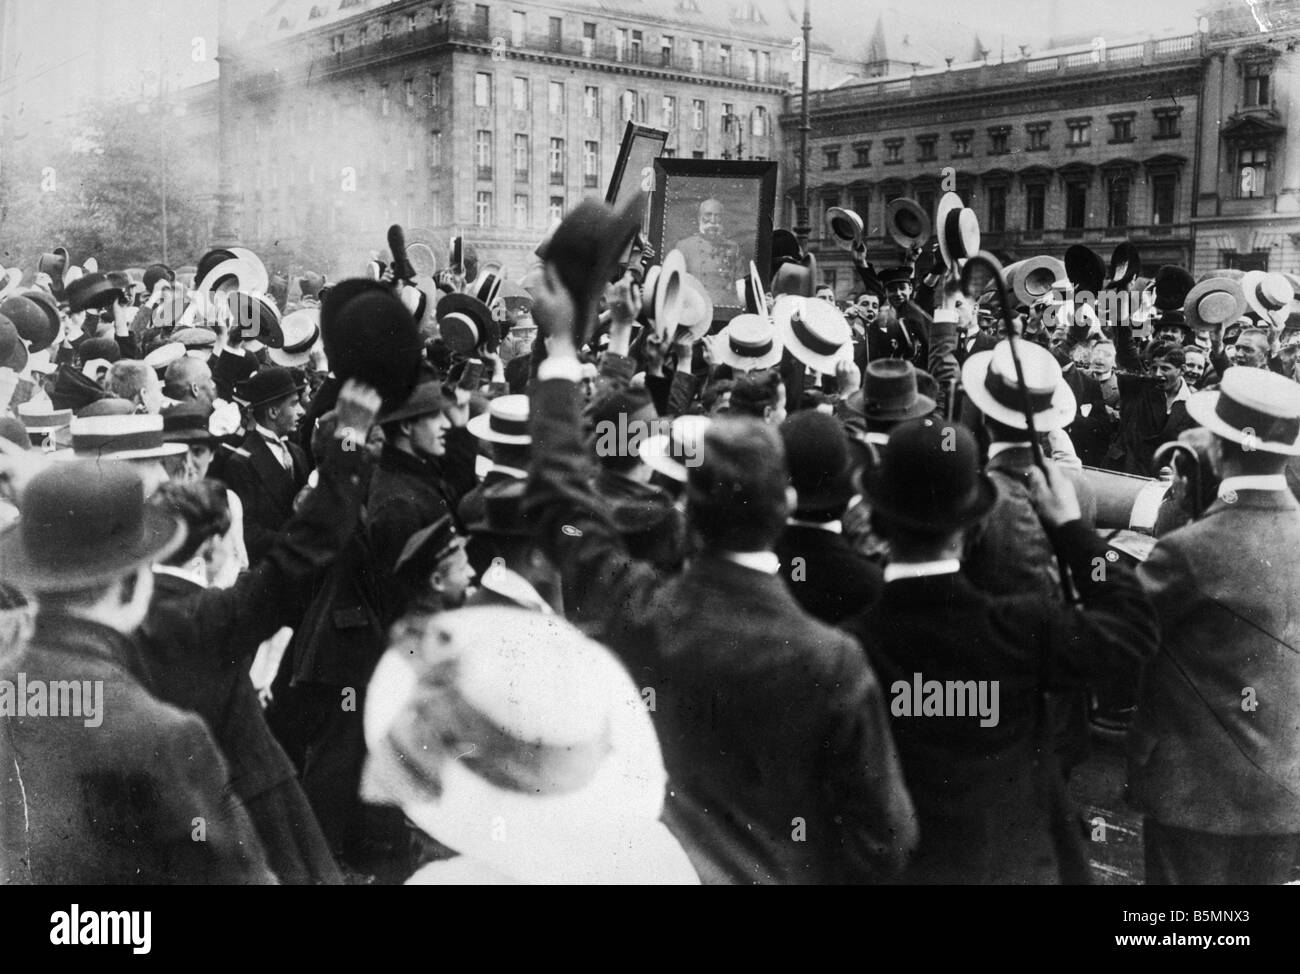 8 1914 8 1 A3 8 E Jubilant crowds Berlin 1914 World War I 1914 18 Berlin The outbreak of war and mobilisation of troops on 1 Aug Stock Photo